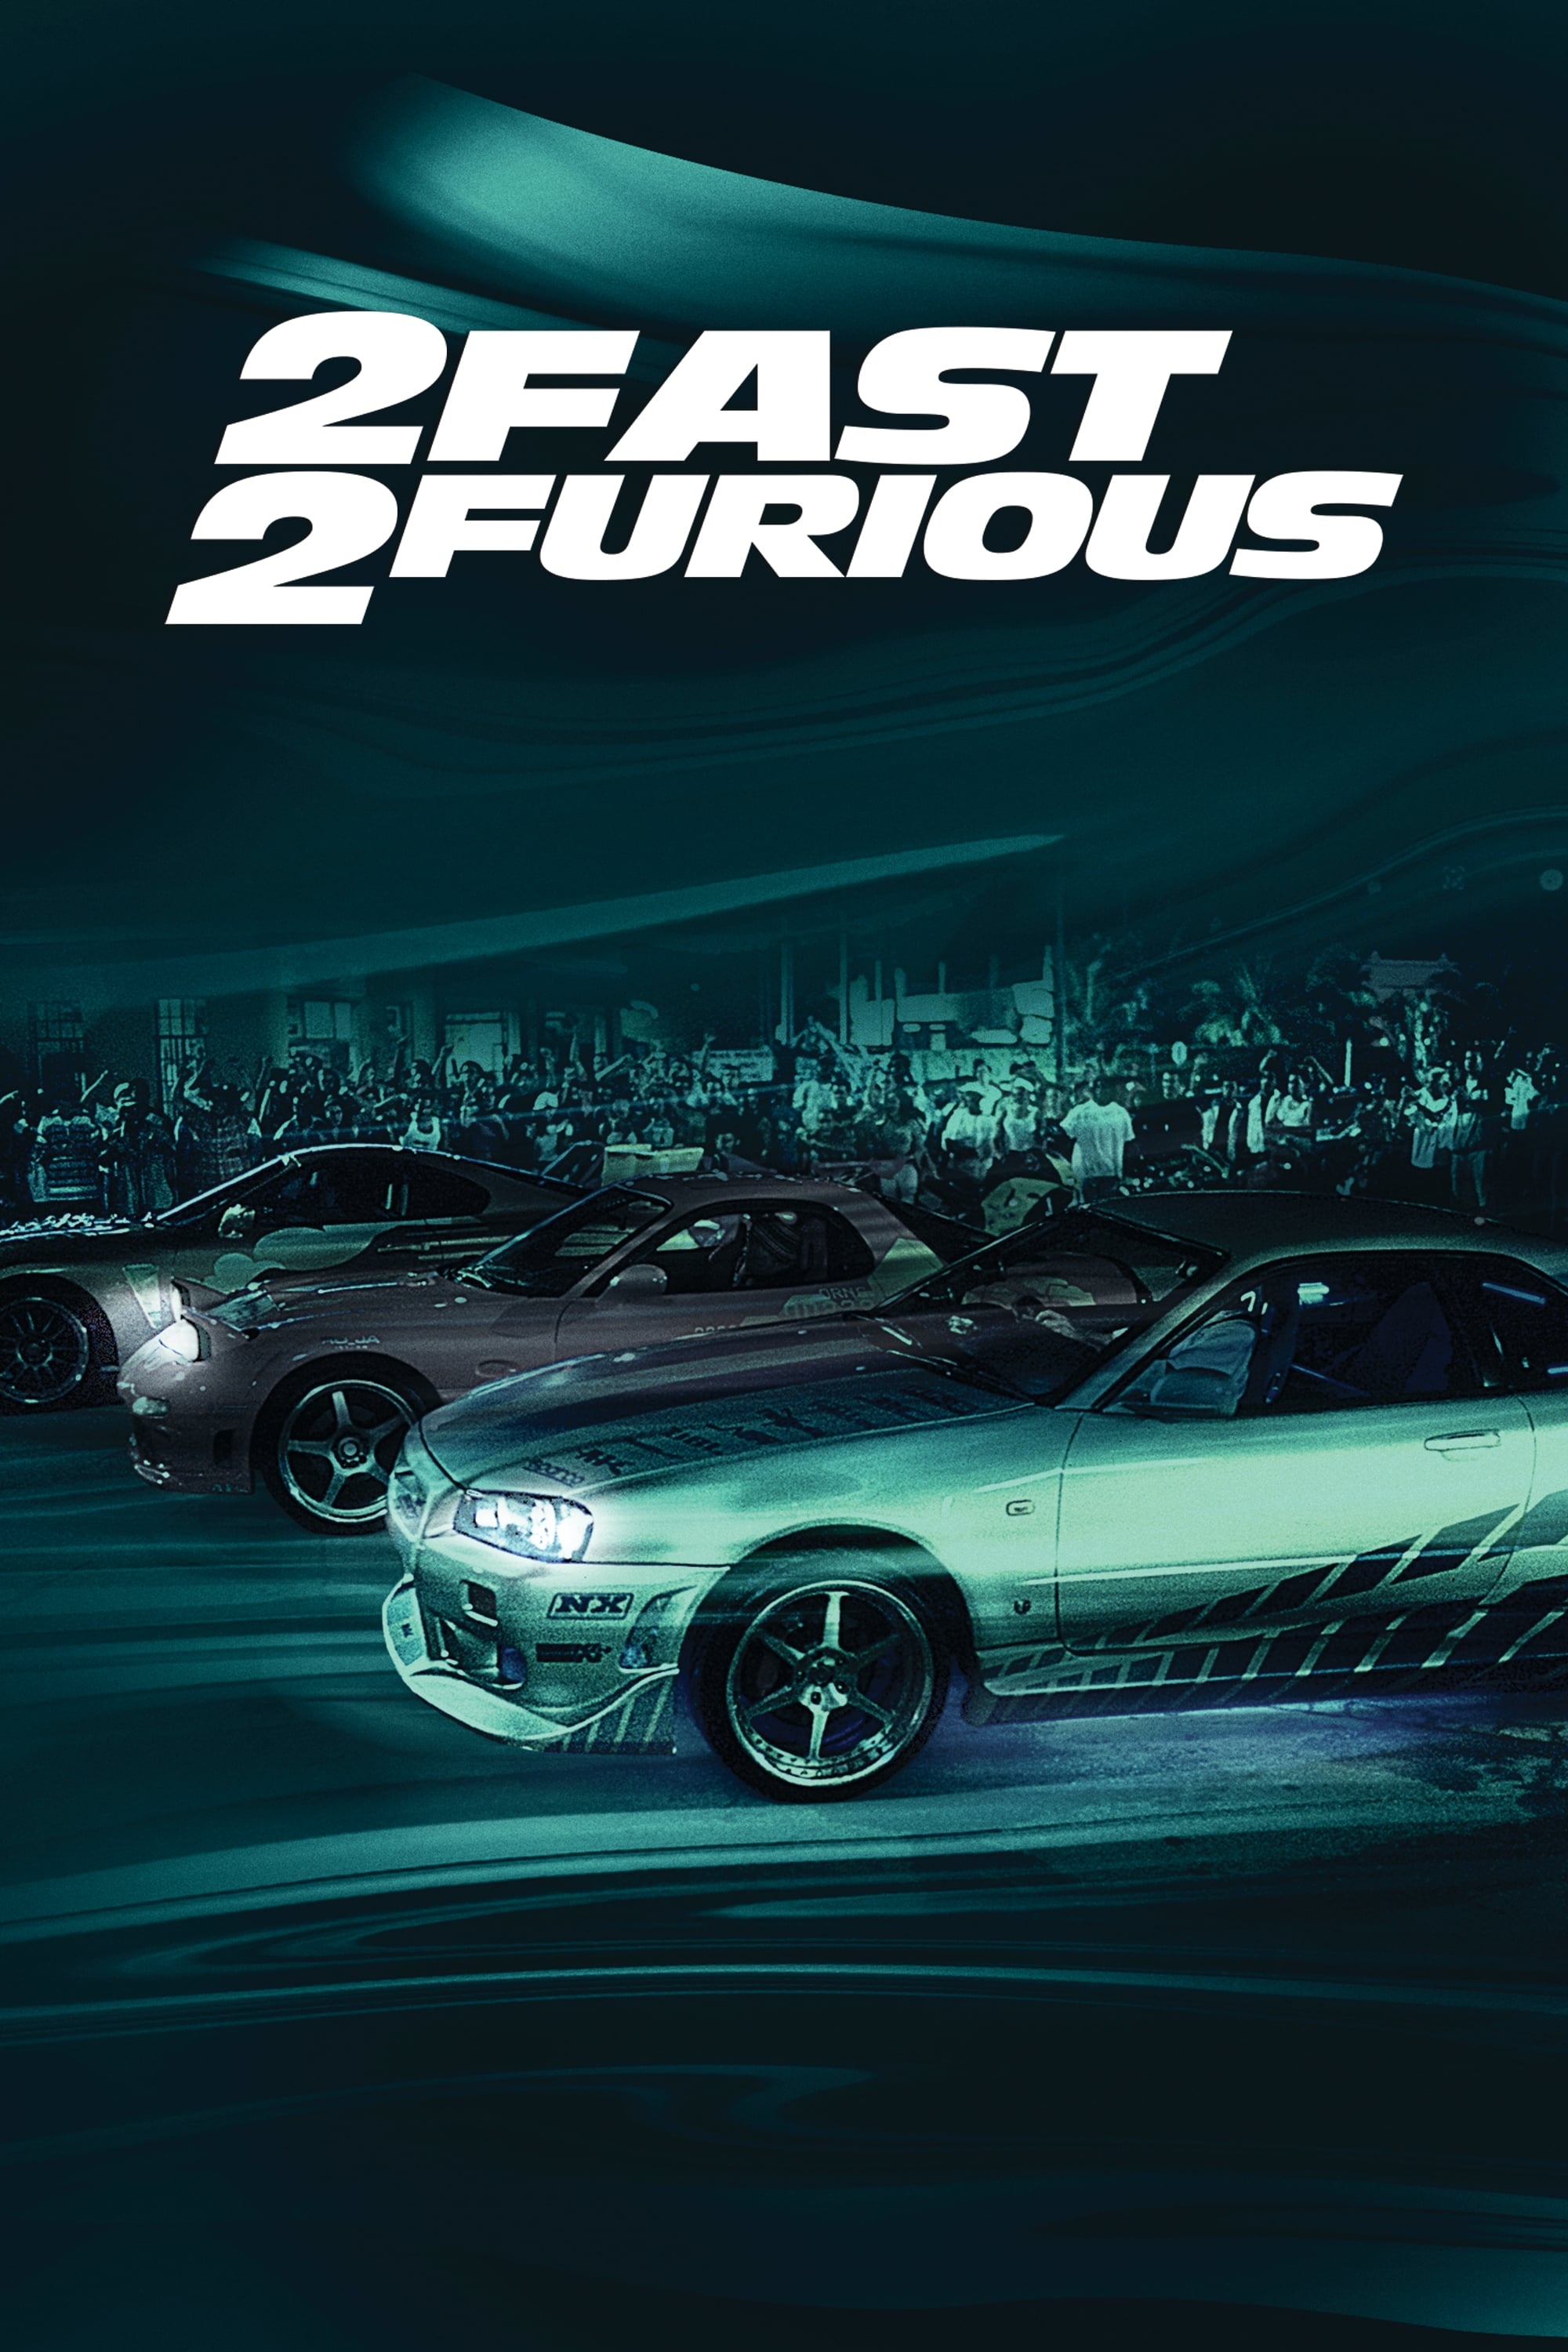 fast and furious 2 full movie in hindi dubbed download